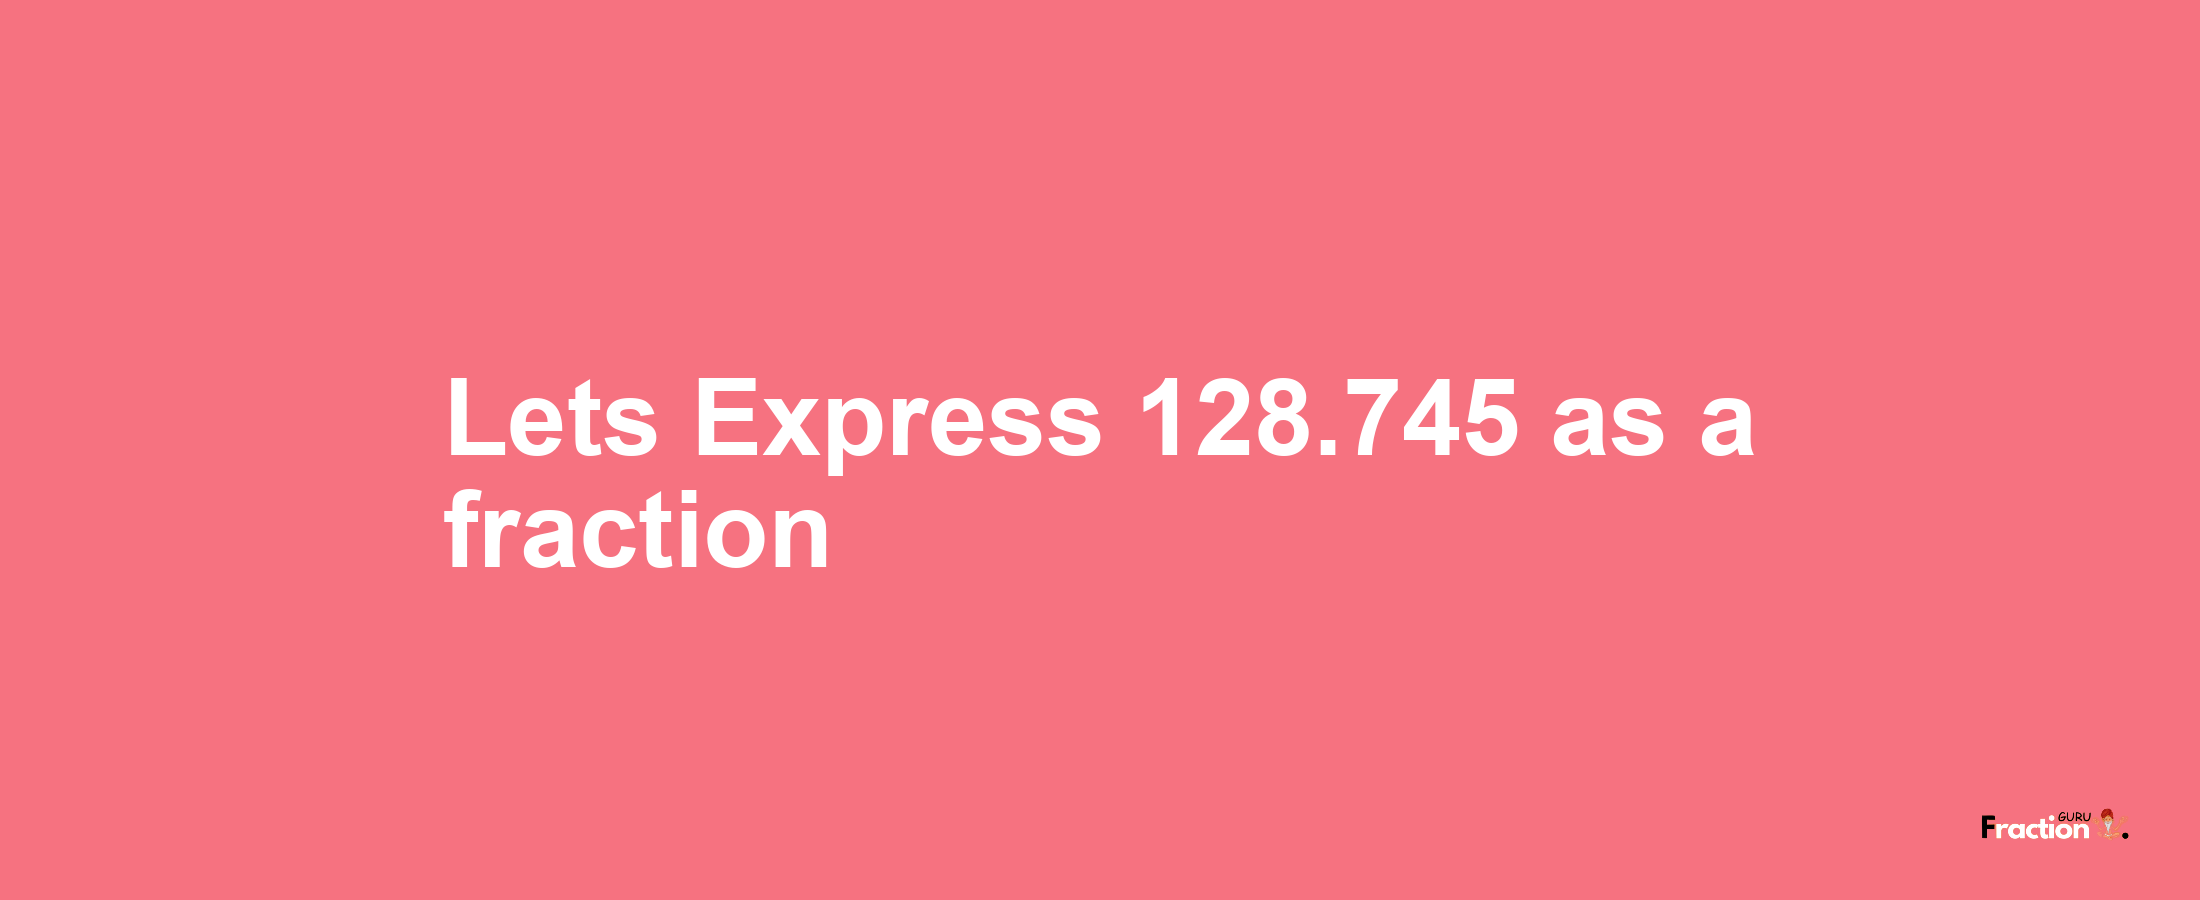 Lets Express 128.745 as afraction